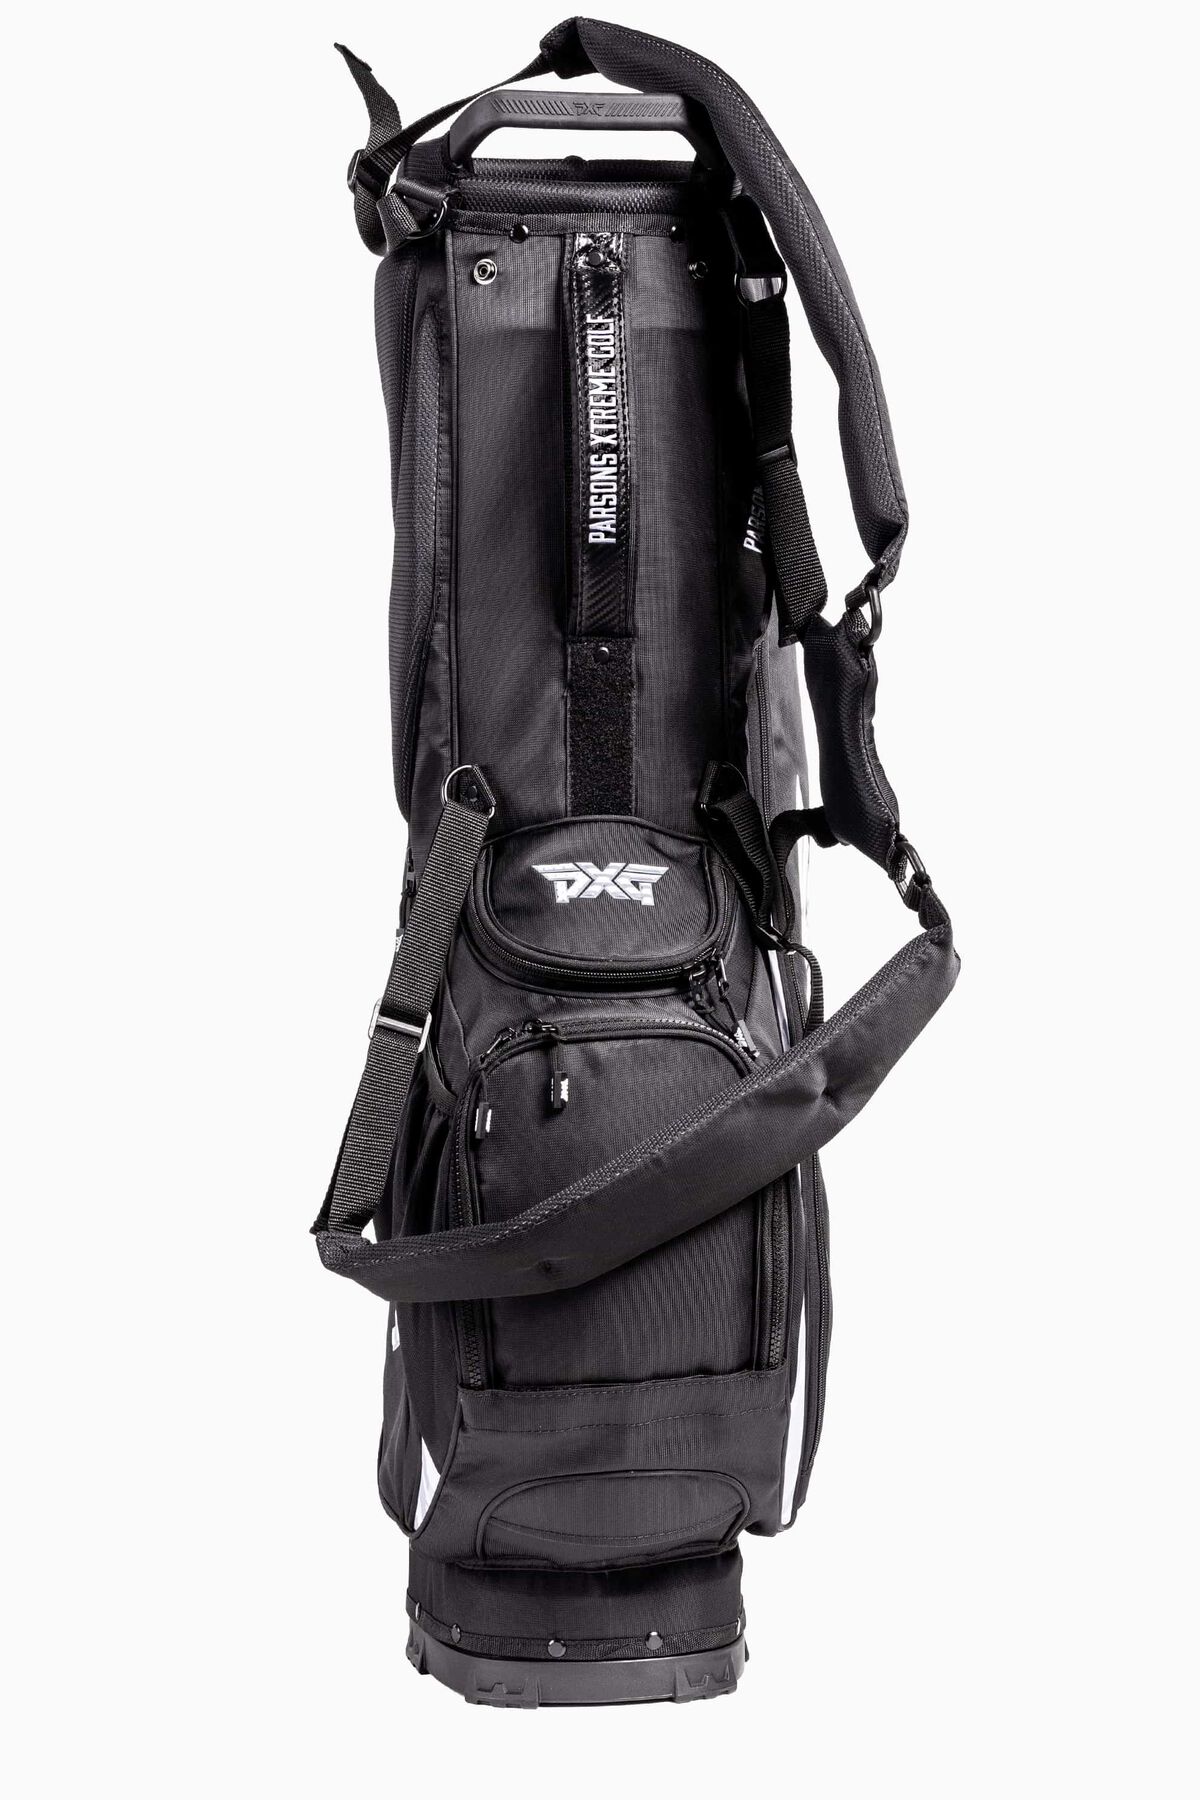 Freedom Collection Lightweight Carry Stand Bag Black & White